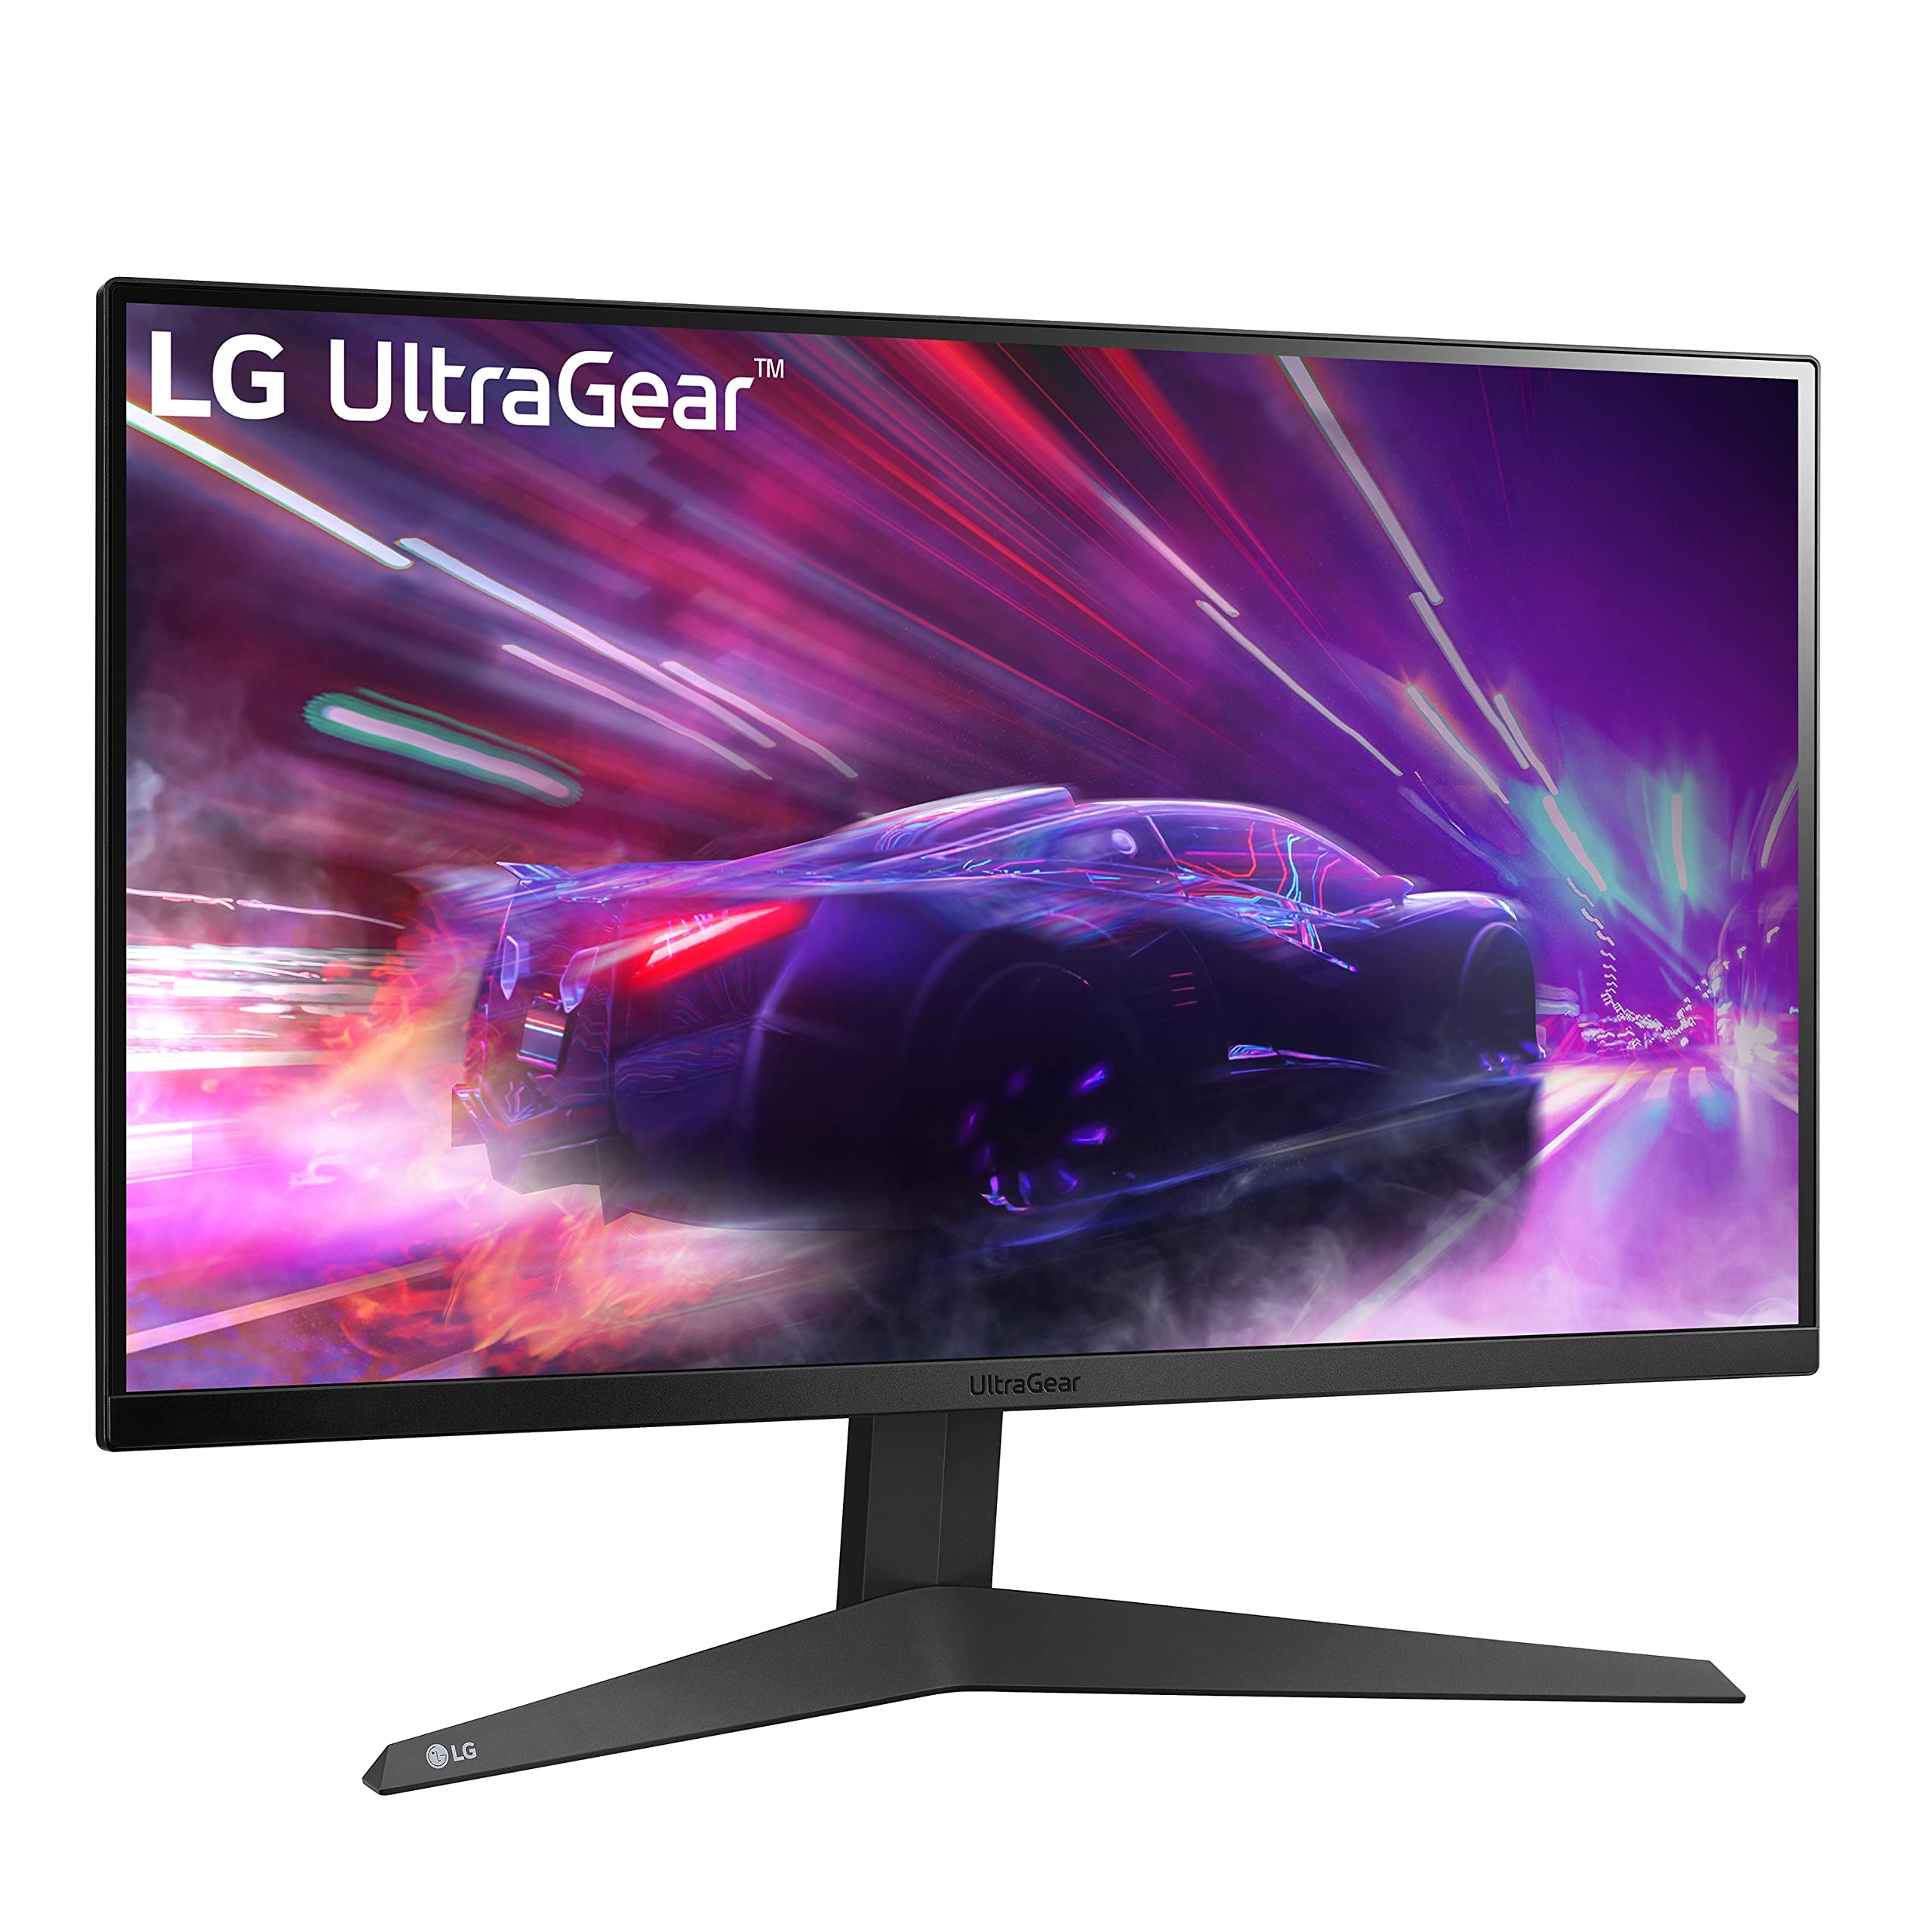 LG 24GQ50F-B 24-Inch Class Full HD (1920 x 1080) Ultragear Gaming Monitor with 165Hz Refresh Rate and 1ms MBR, AMD FreeSync Premium and 3-Side Virtually Borderless Design,Black